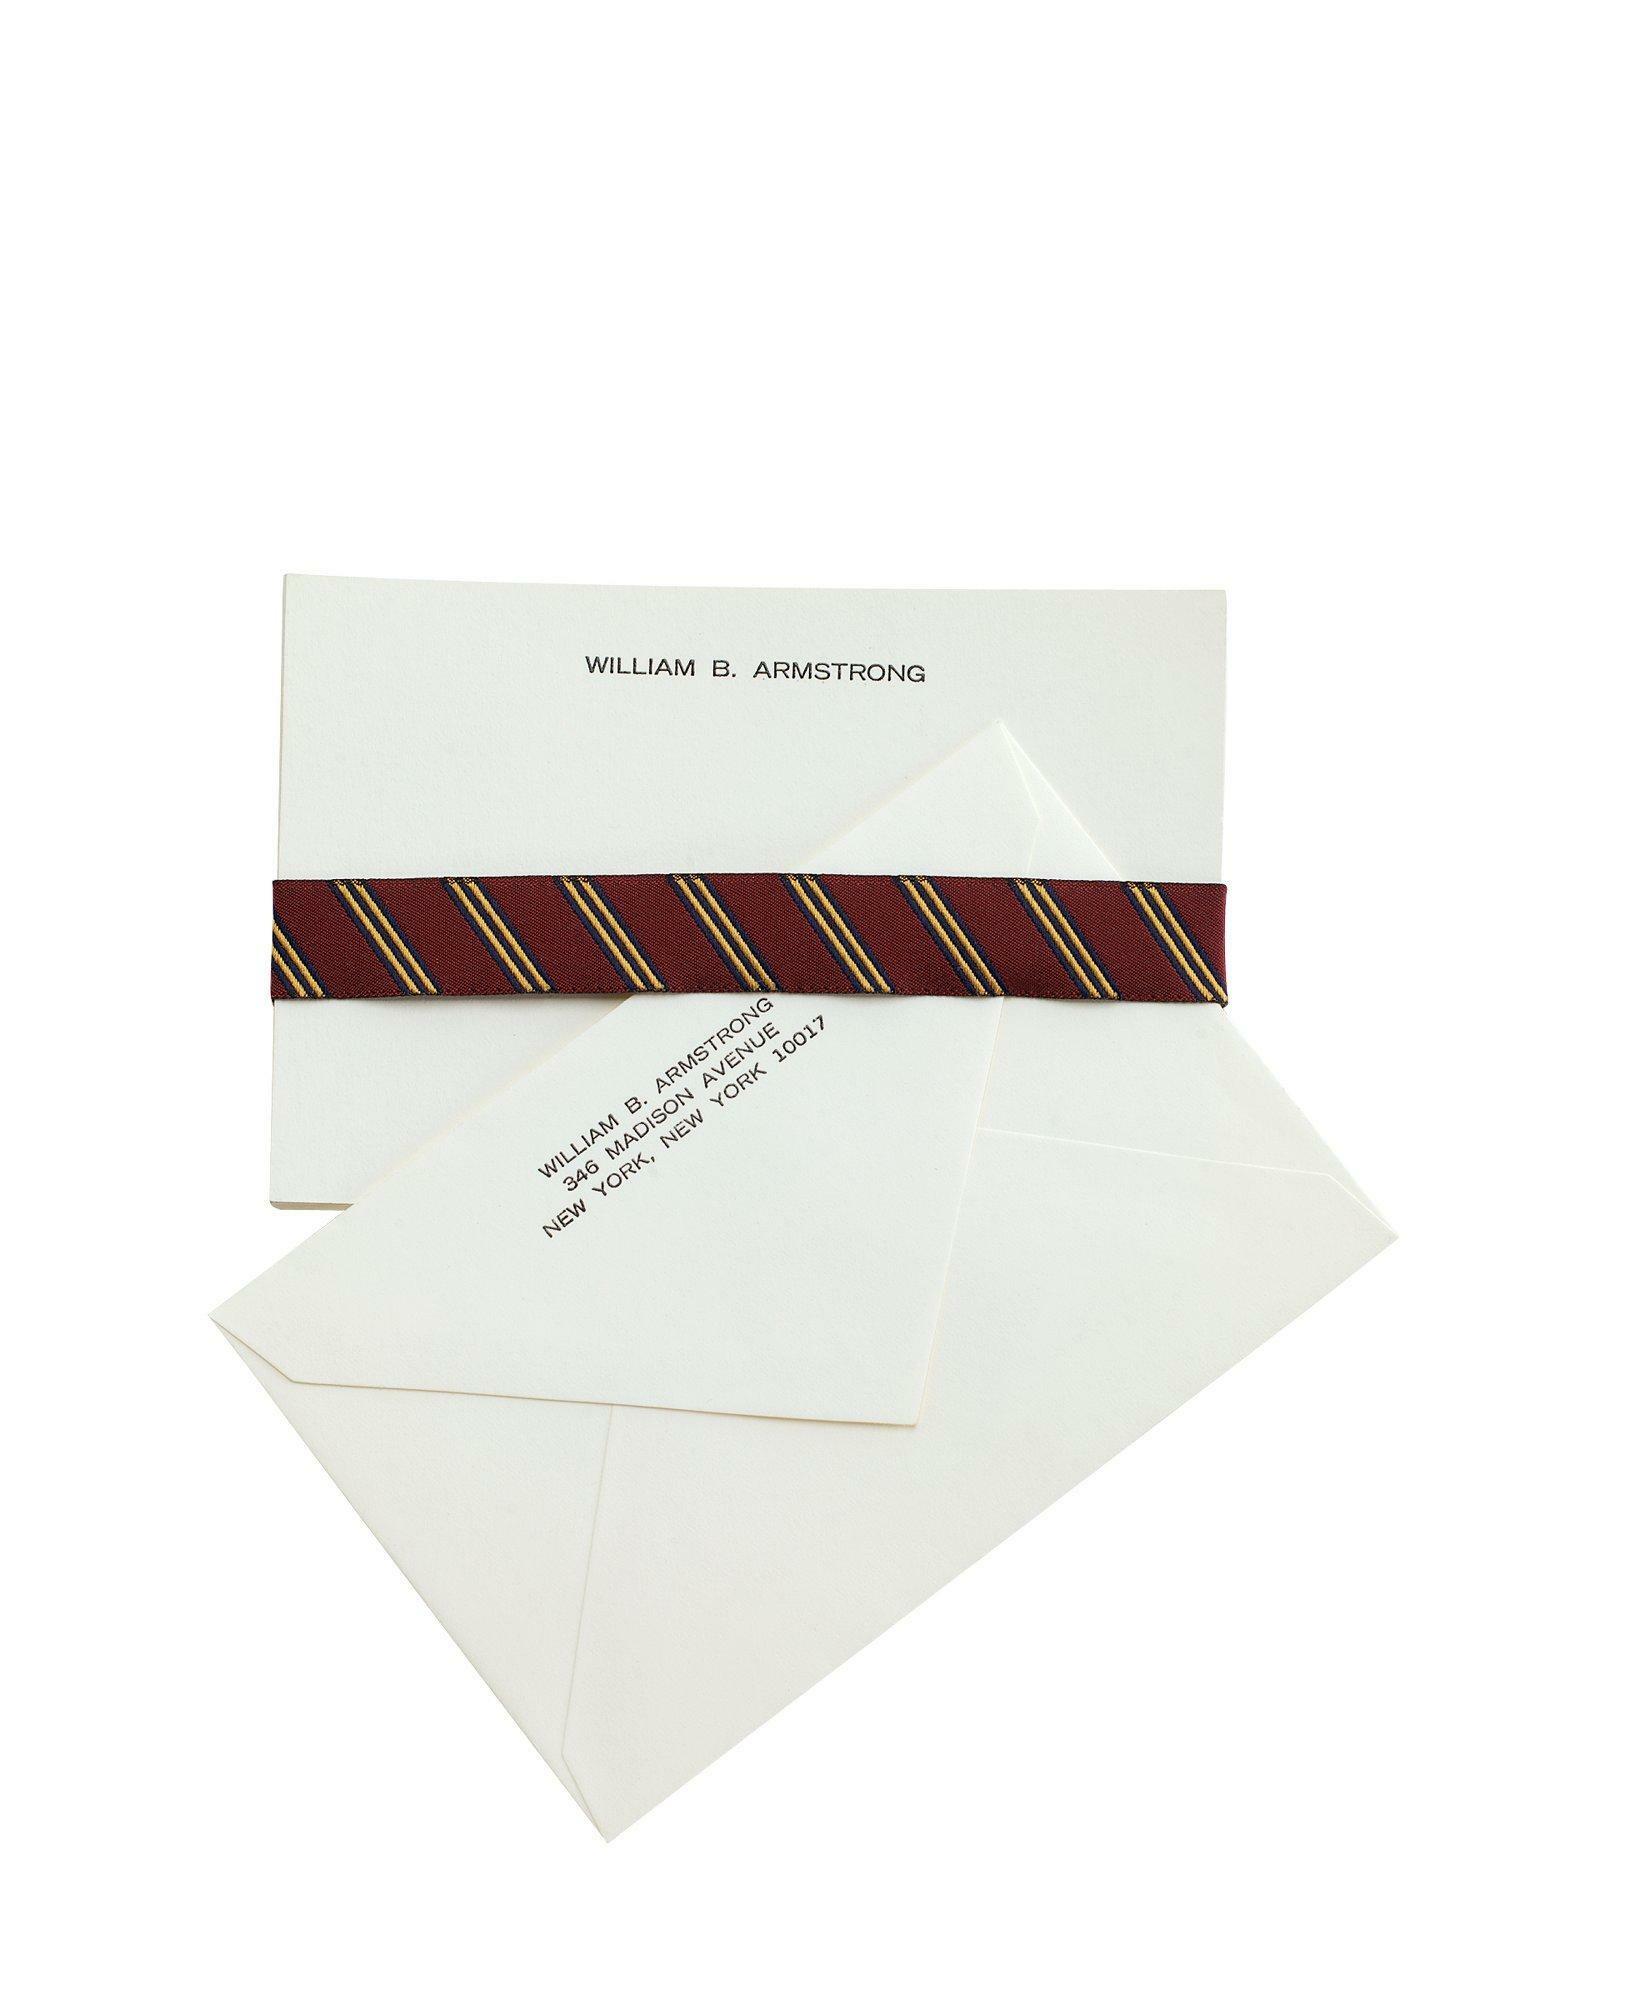 Photo: Brooks Brothers Correspondence Cards - 50 Cards & Envelopes Shoes | Ivory